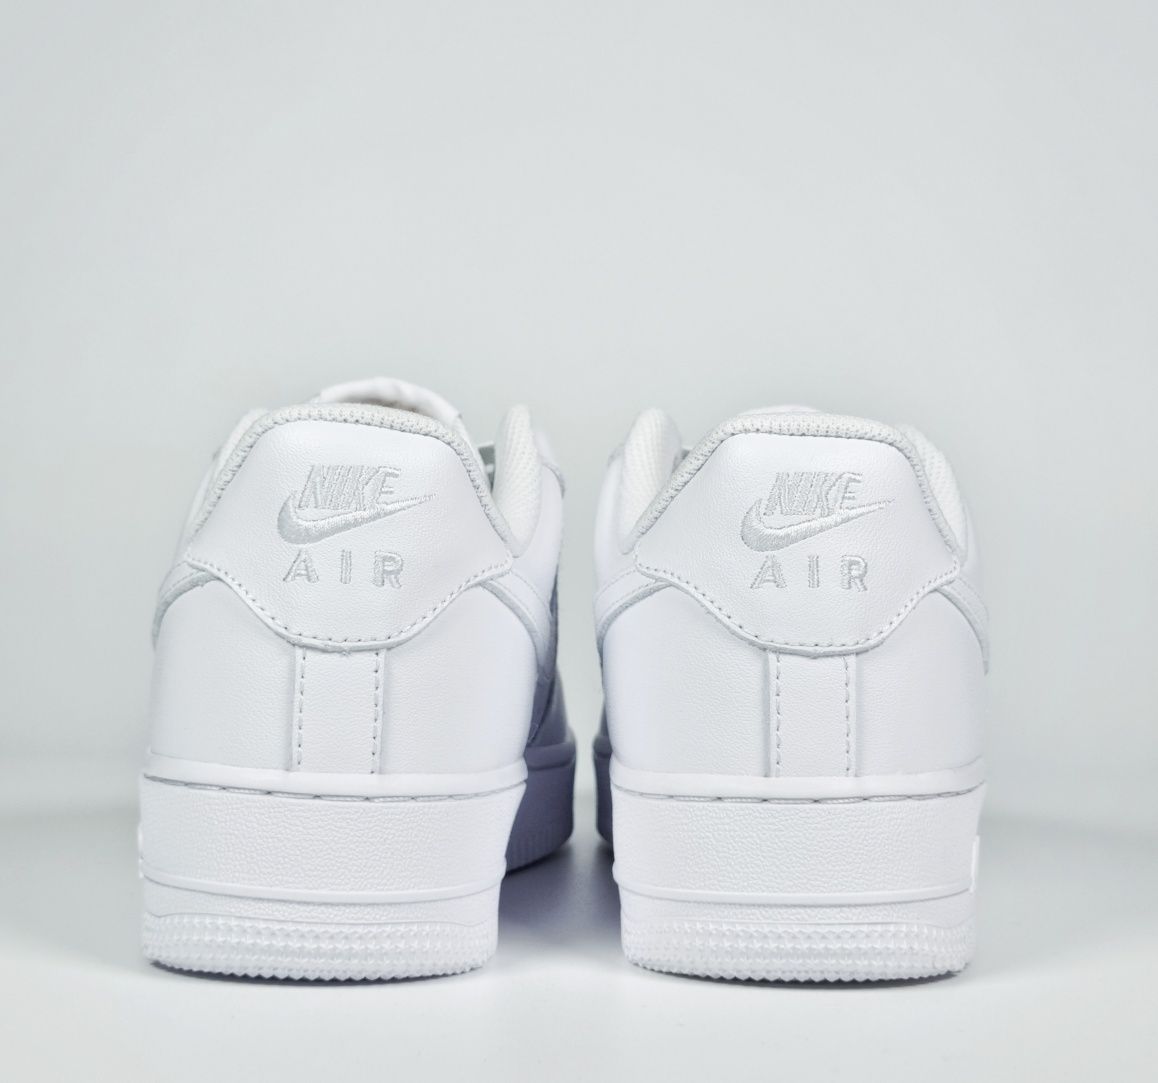 Nike Air Force 1 '07 Low White